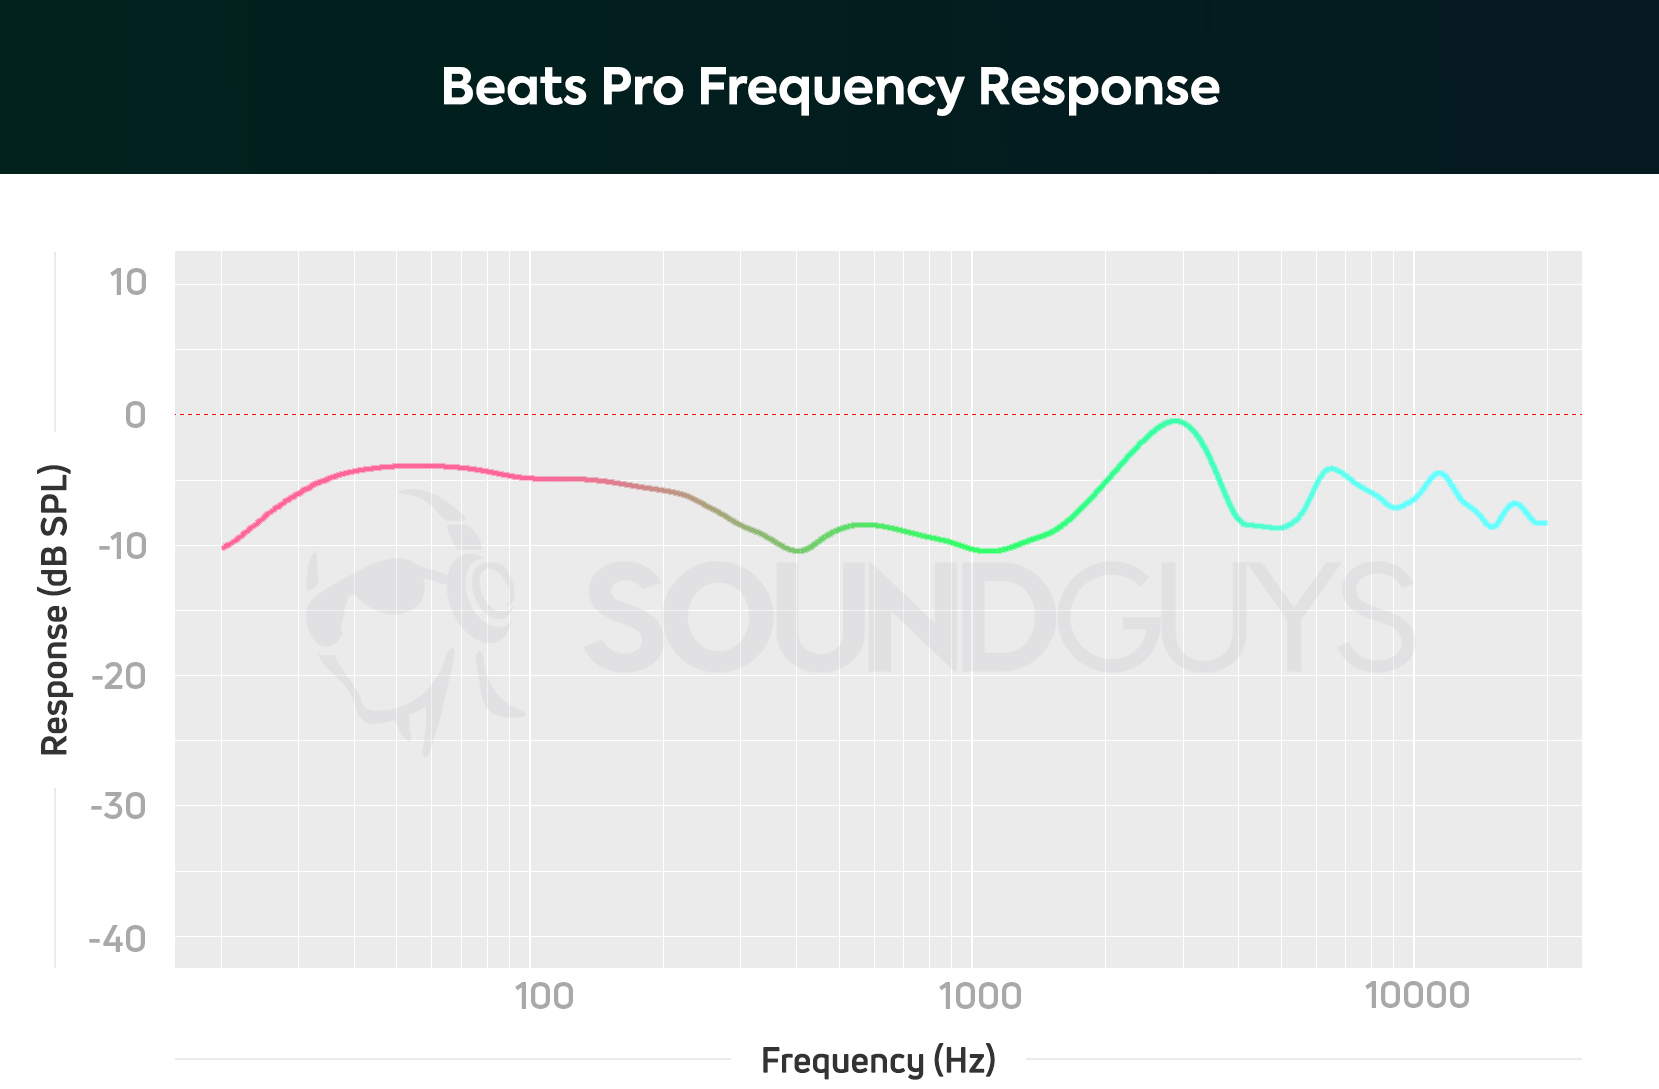 Frequency response of the Beats Pro.